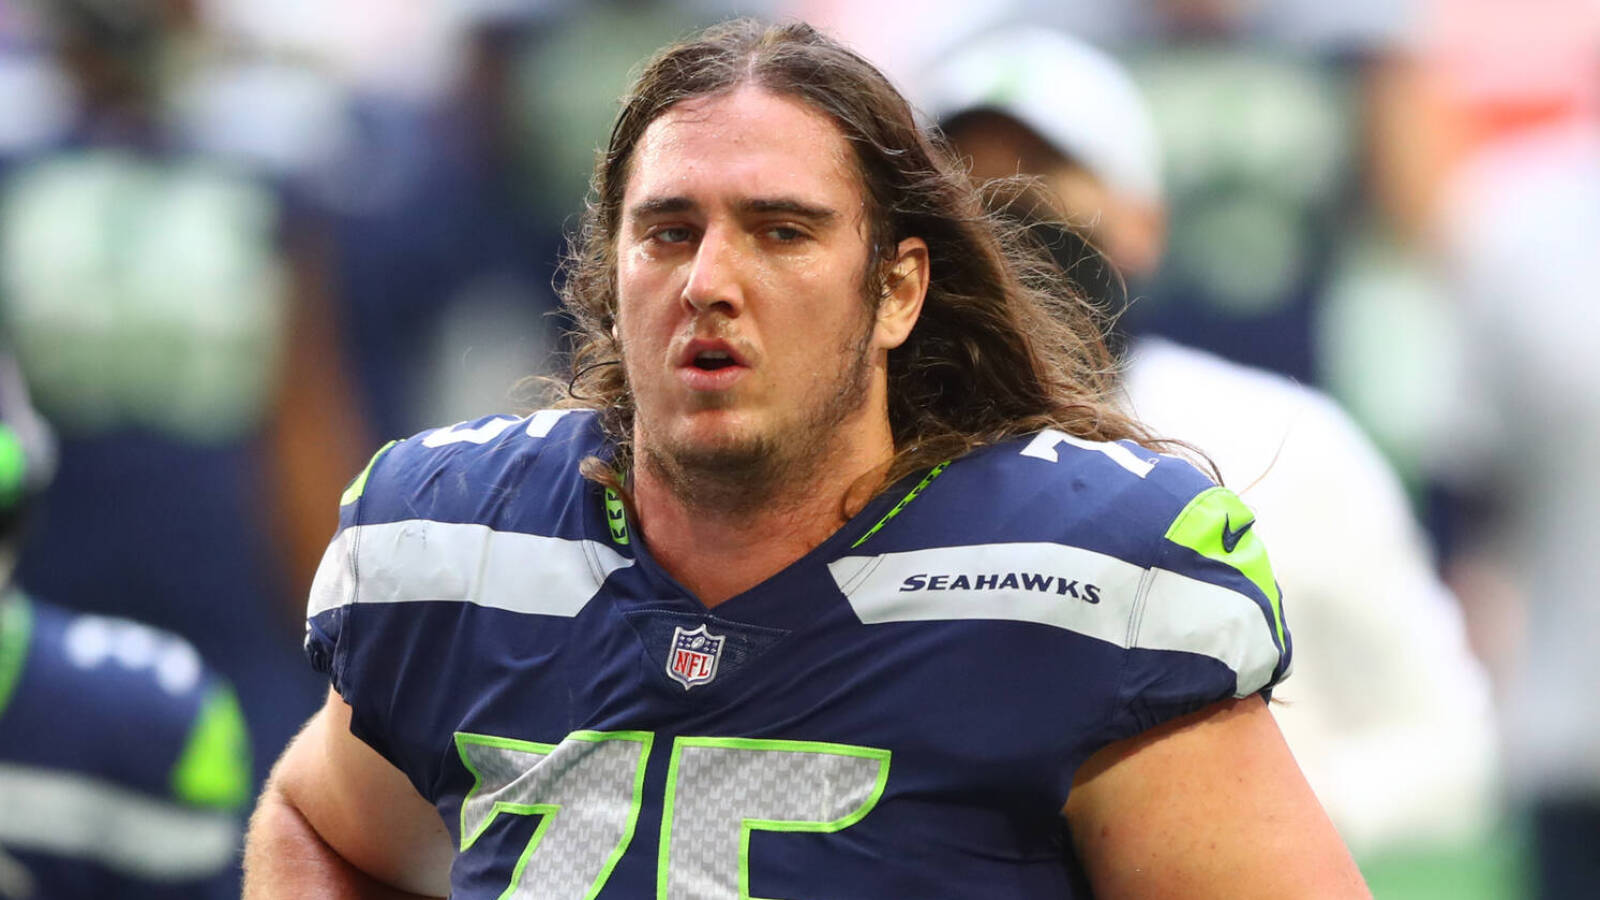 Ex-Seahawks OL sentenced to almost seven years in prison